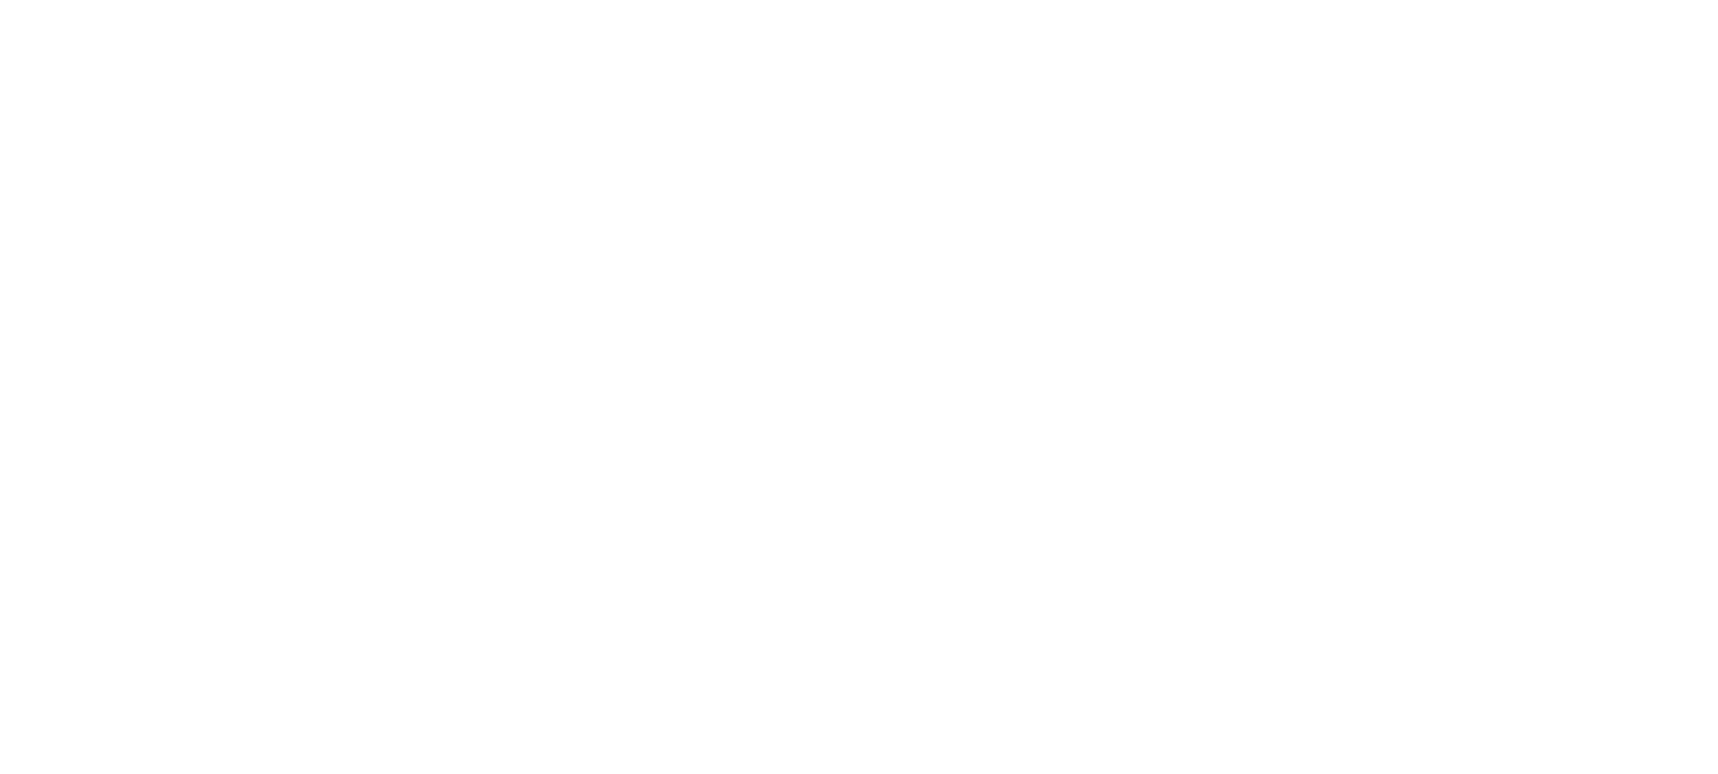 we are leisure makers! ときめきを創造せよ